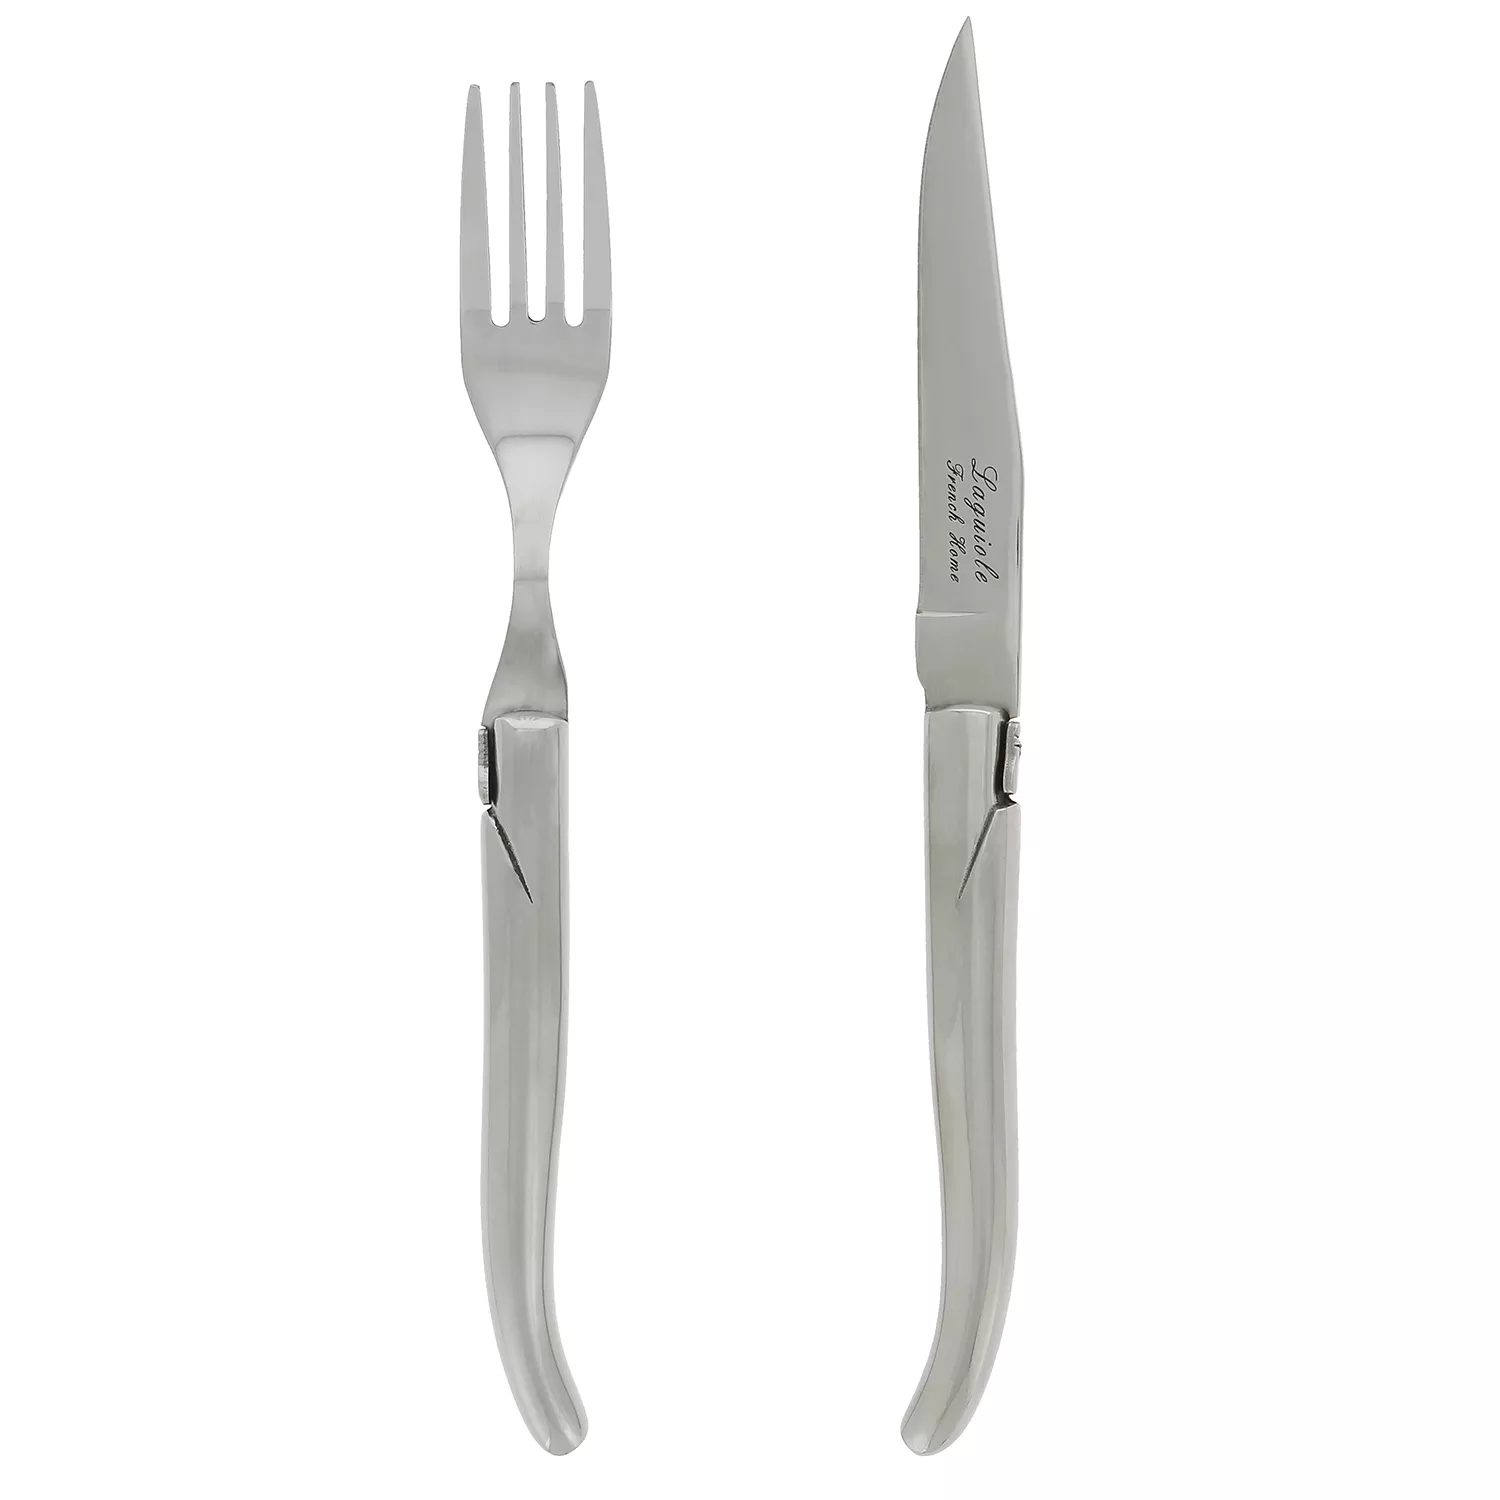 French Home Laguiole Stainless Steel Steak Knives & Forks, Set of 8